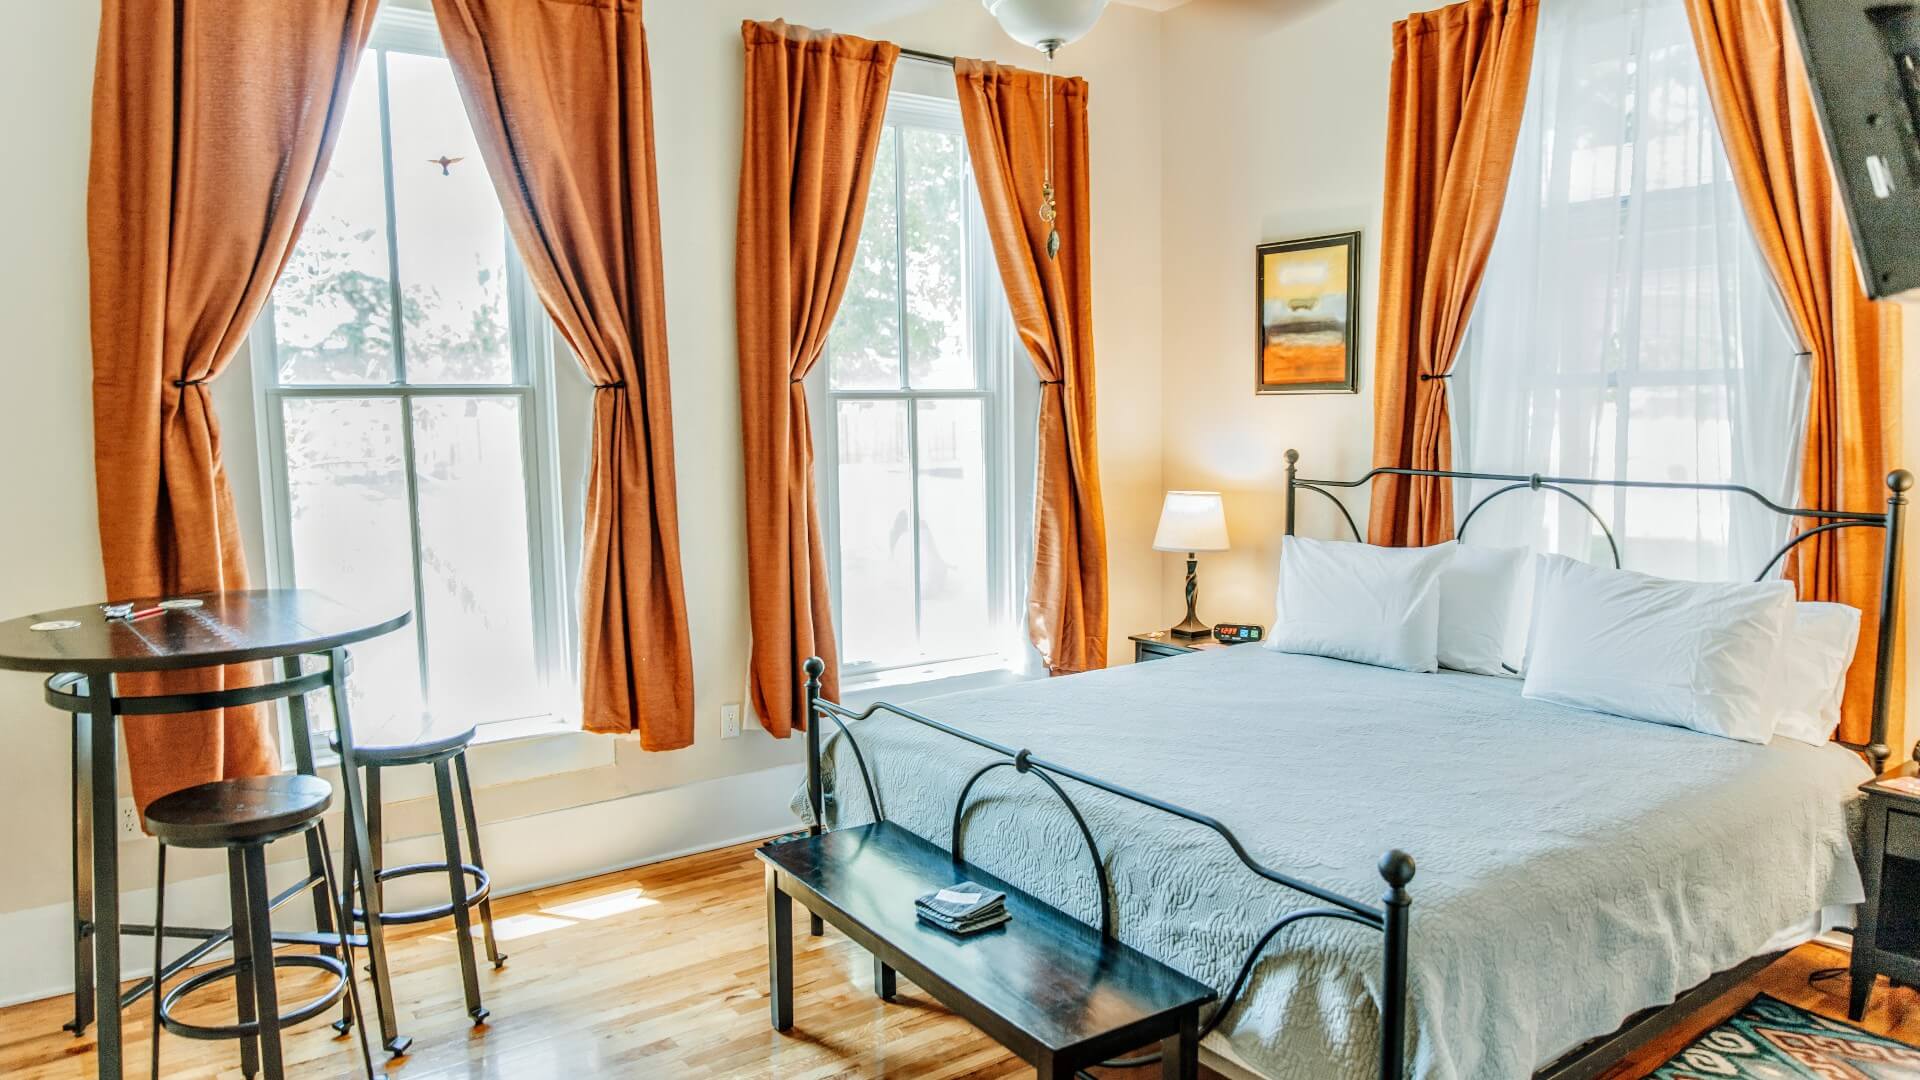 Bedroom with king bed, bistro table with two stools and large bright windows with rust colored curtains